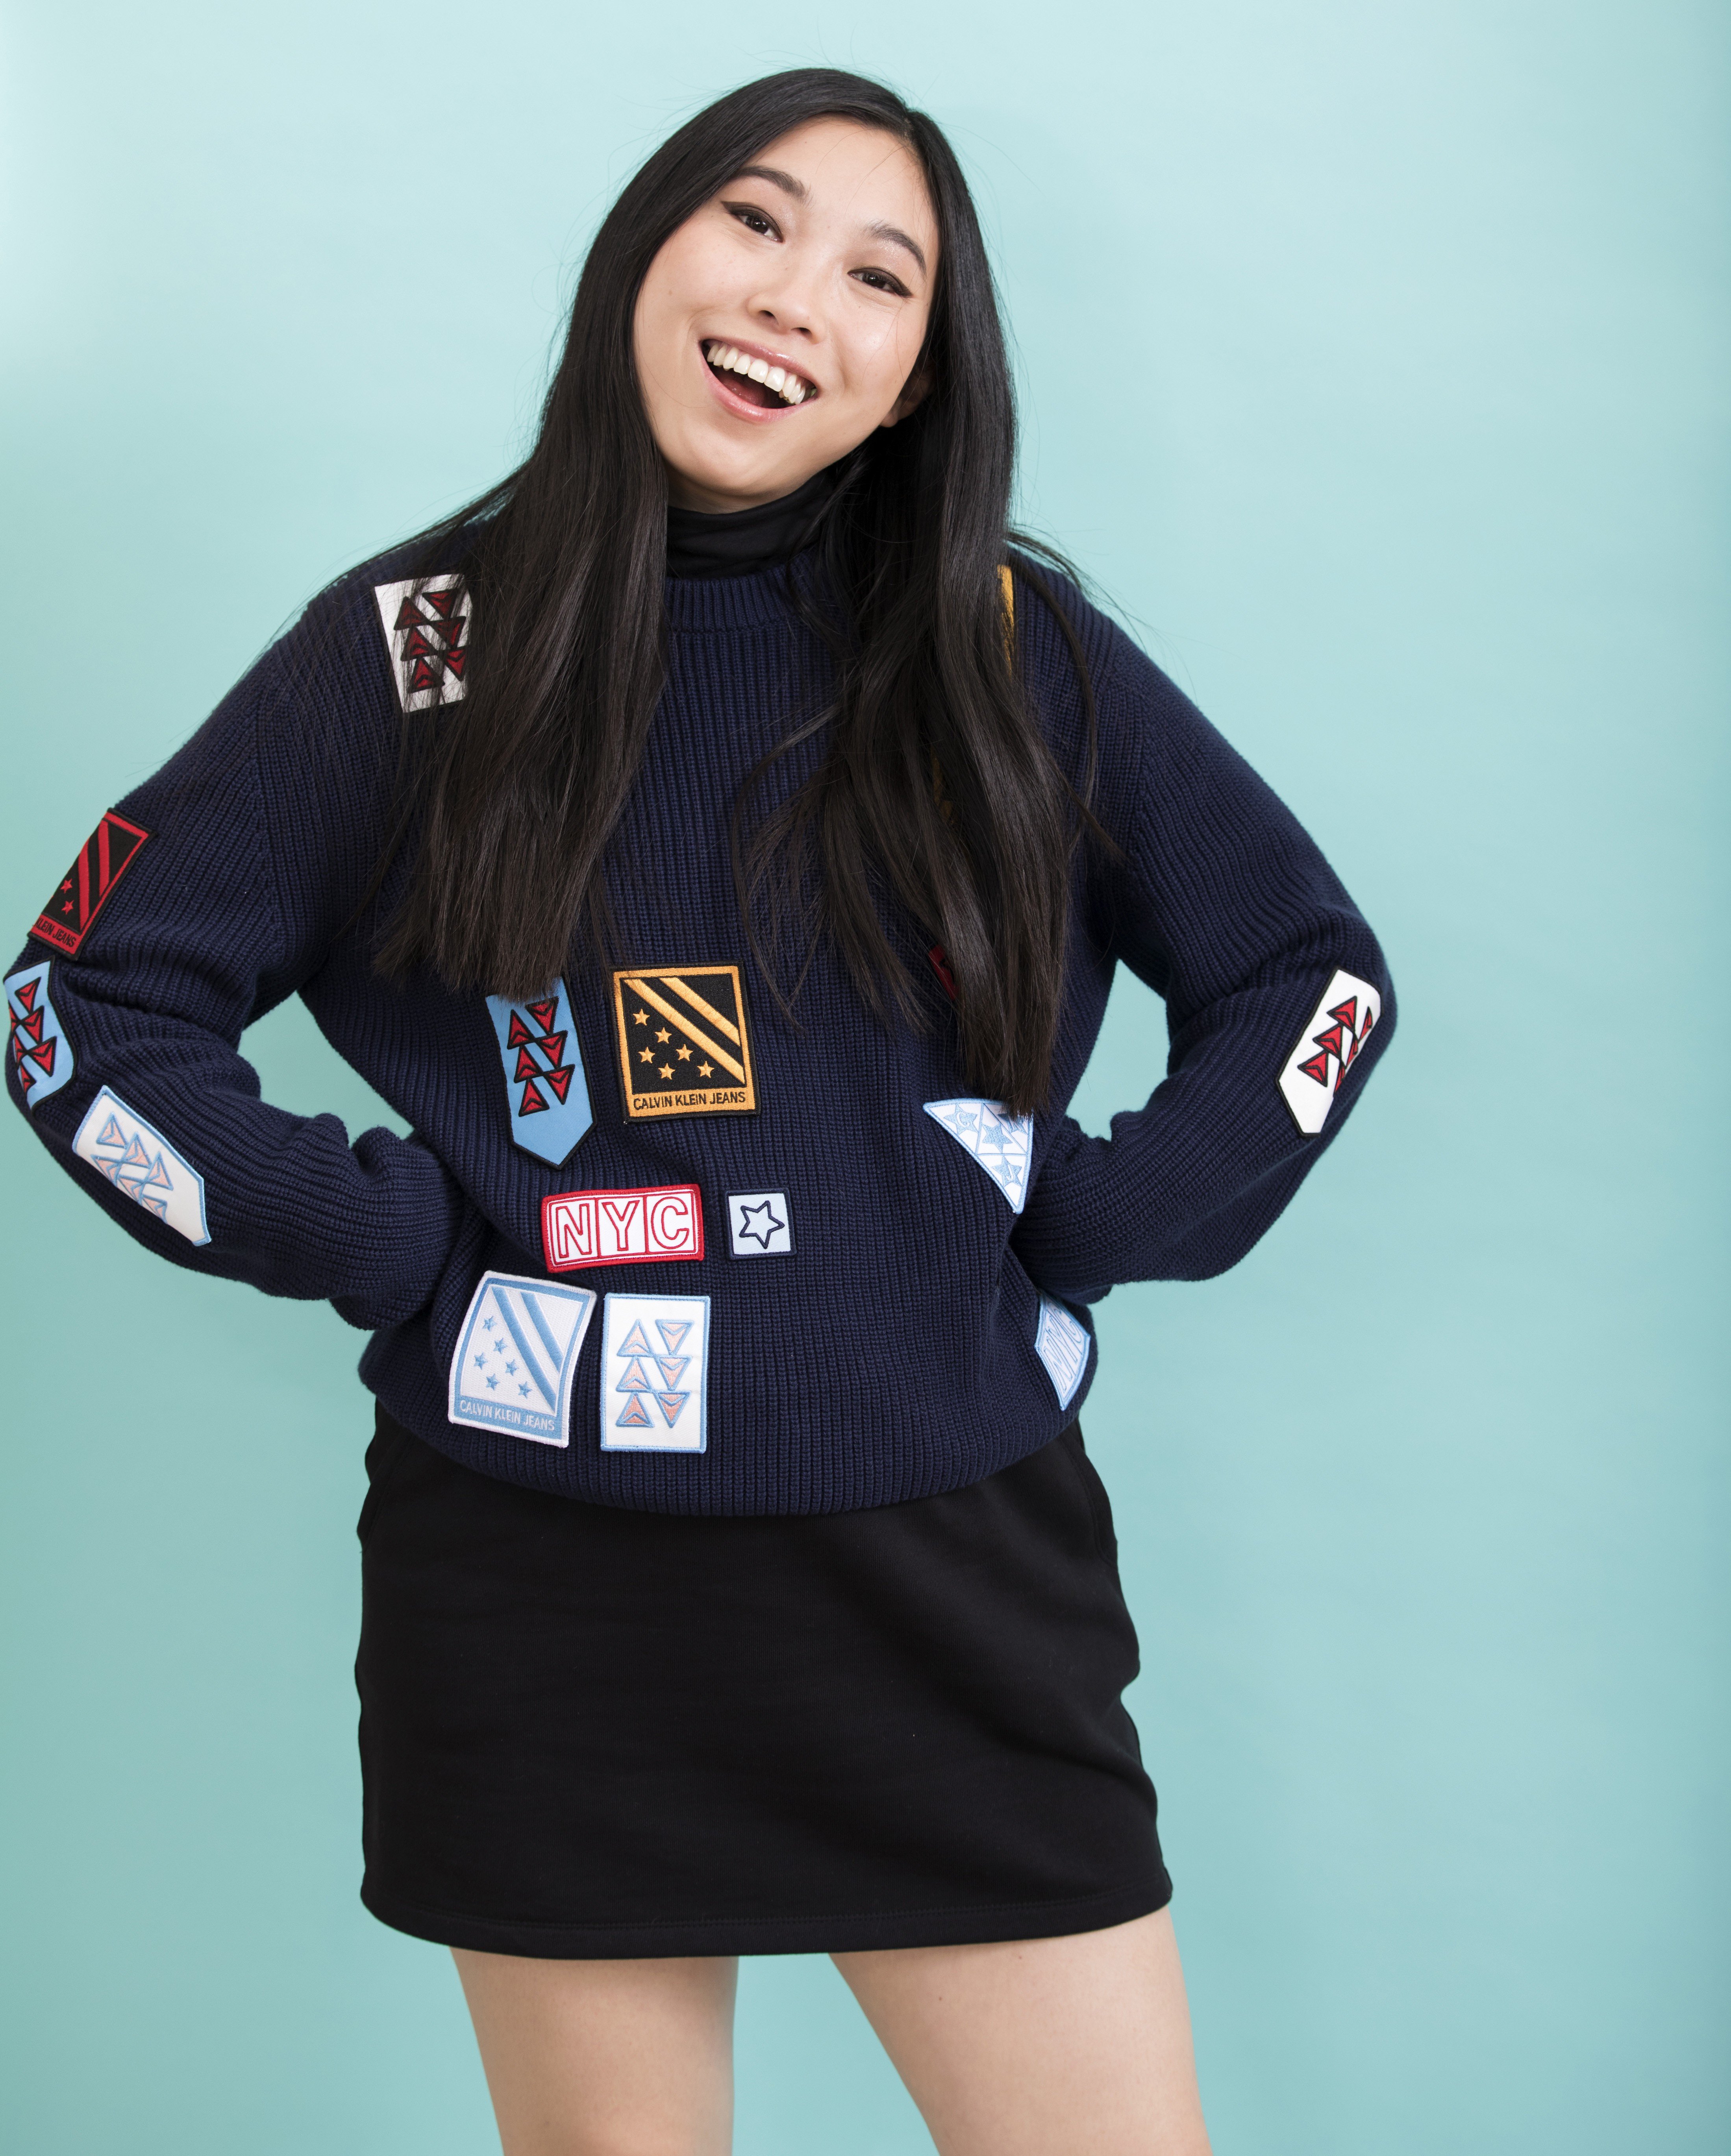 Awkwafina became an instant viral sensation in 2012 when she released a song on YouTube in which she raps about her genitalia. Photo: AP